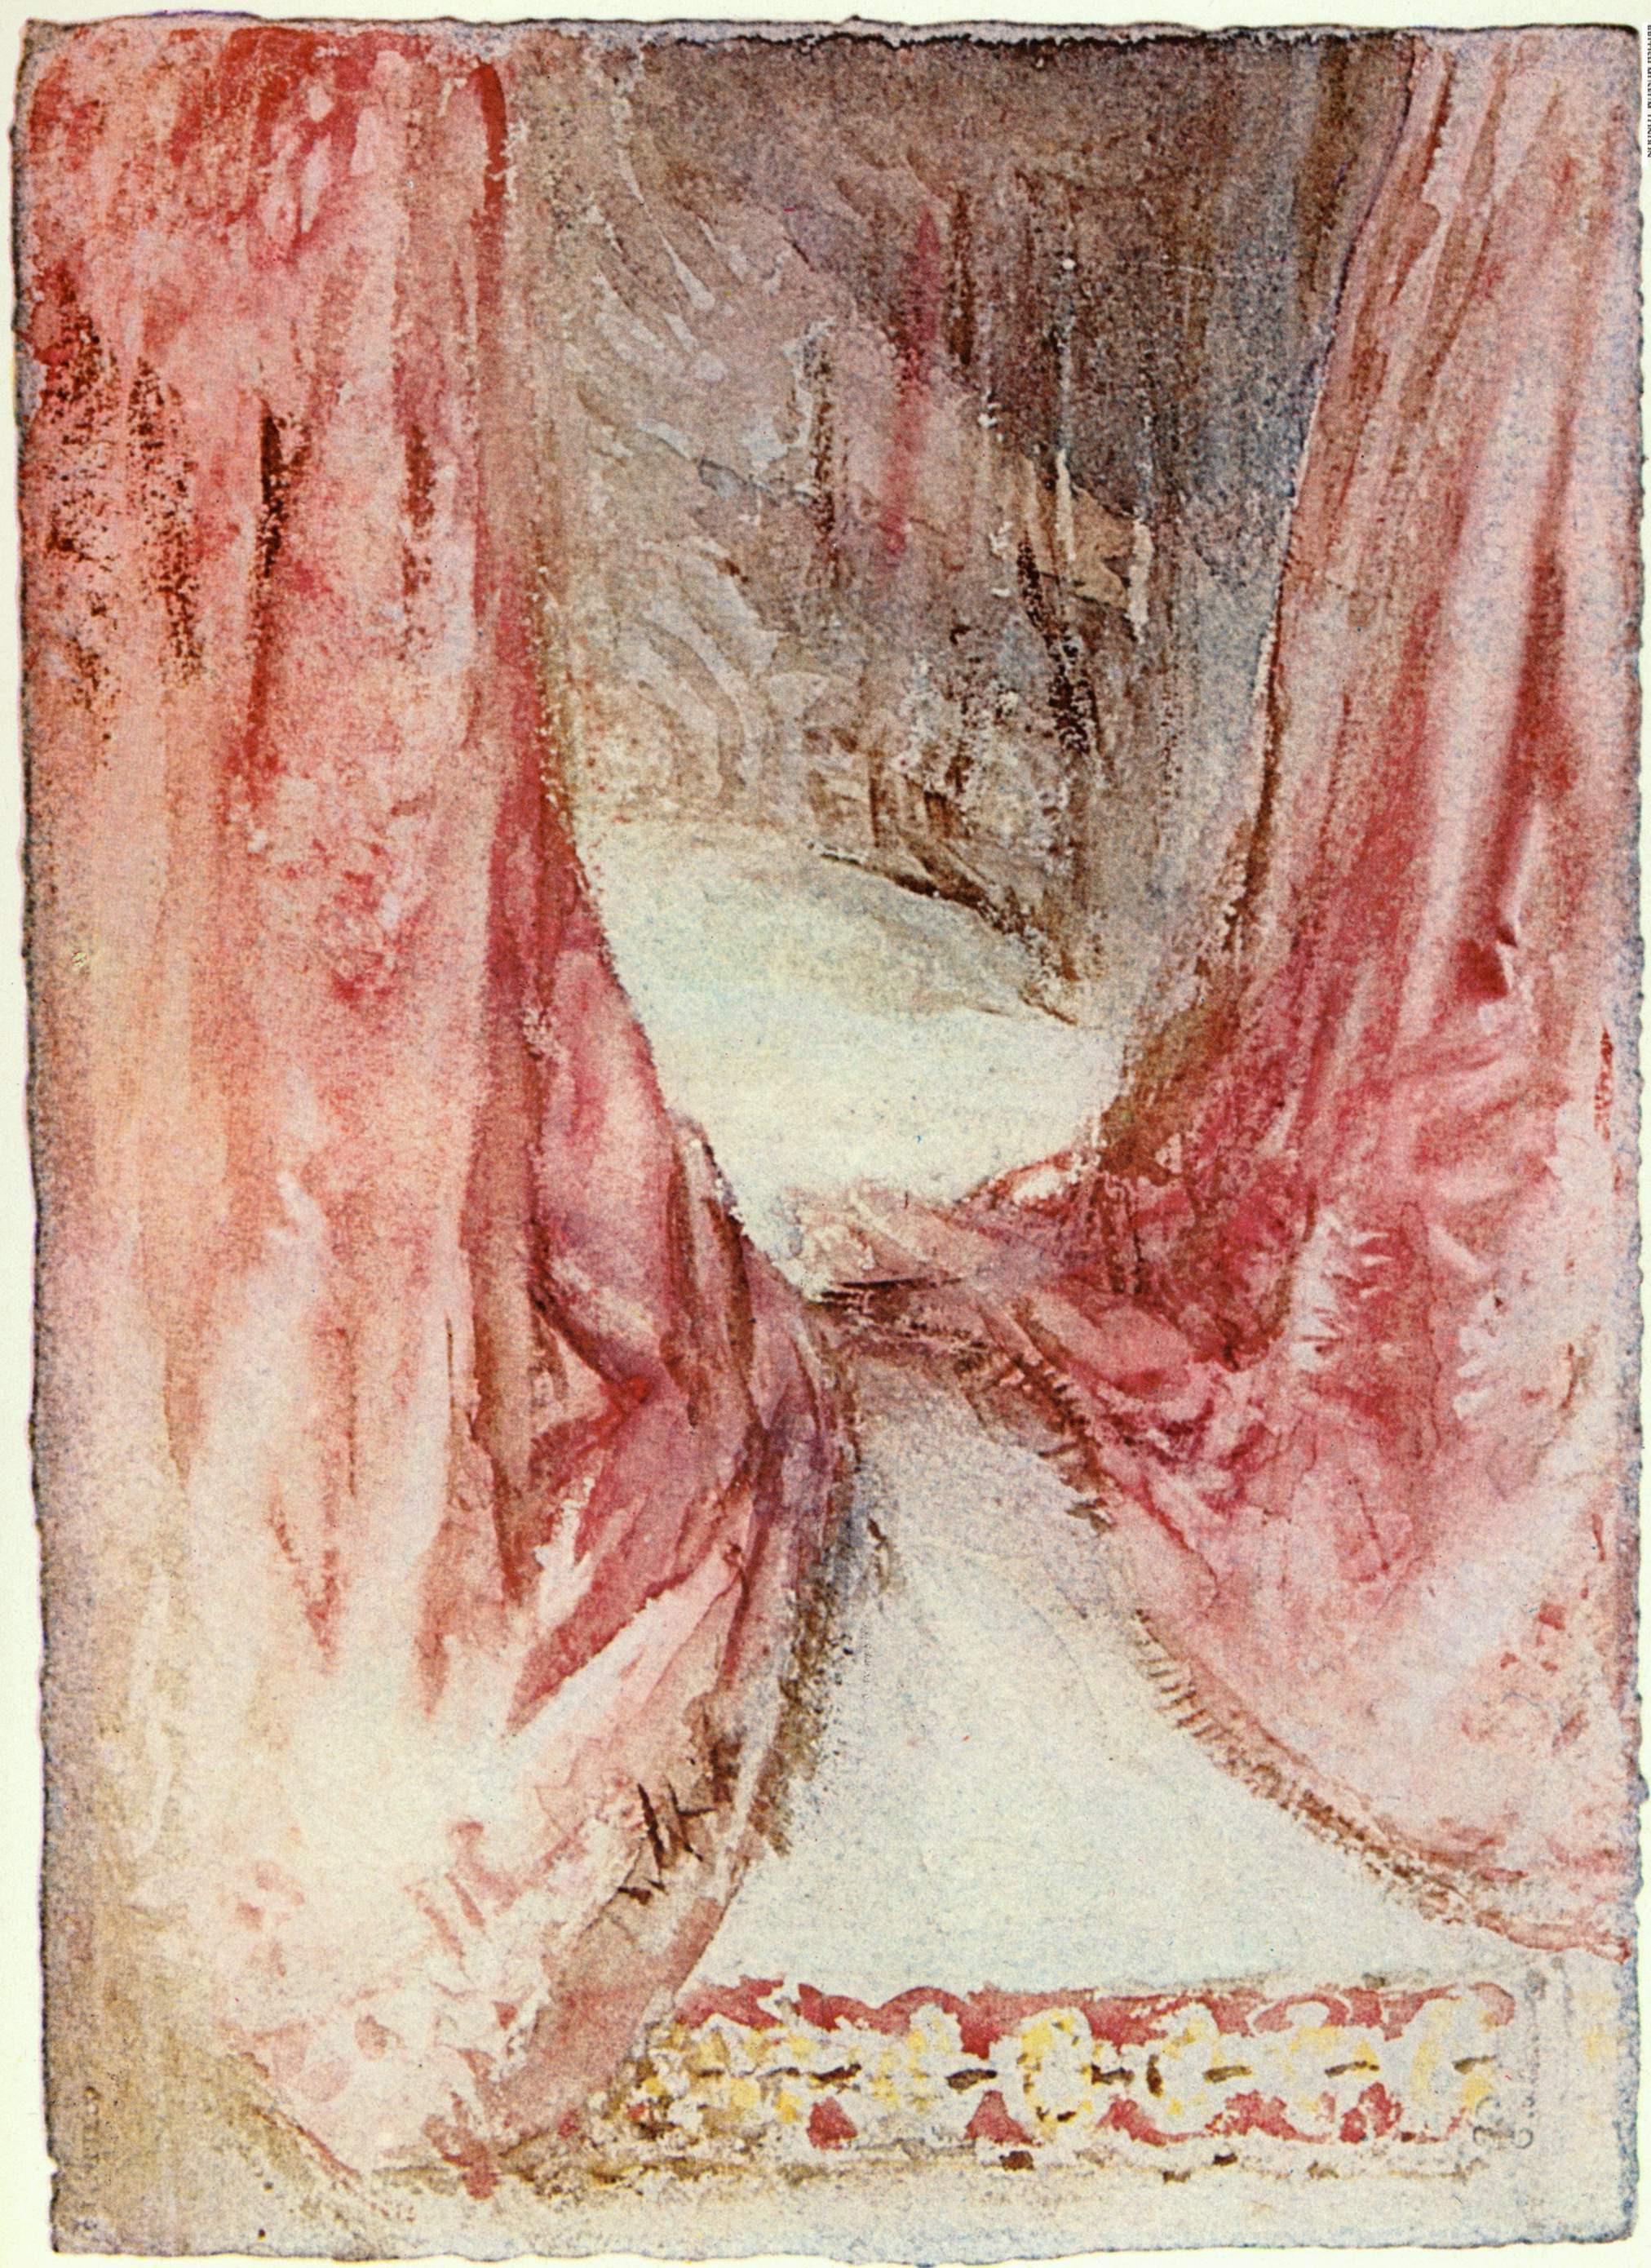 A bed, drapery study